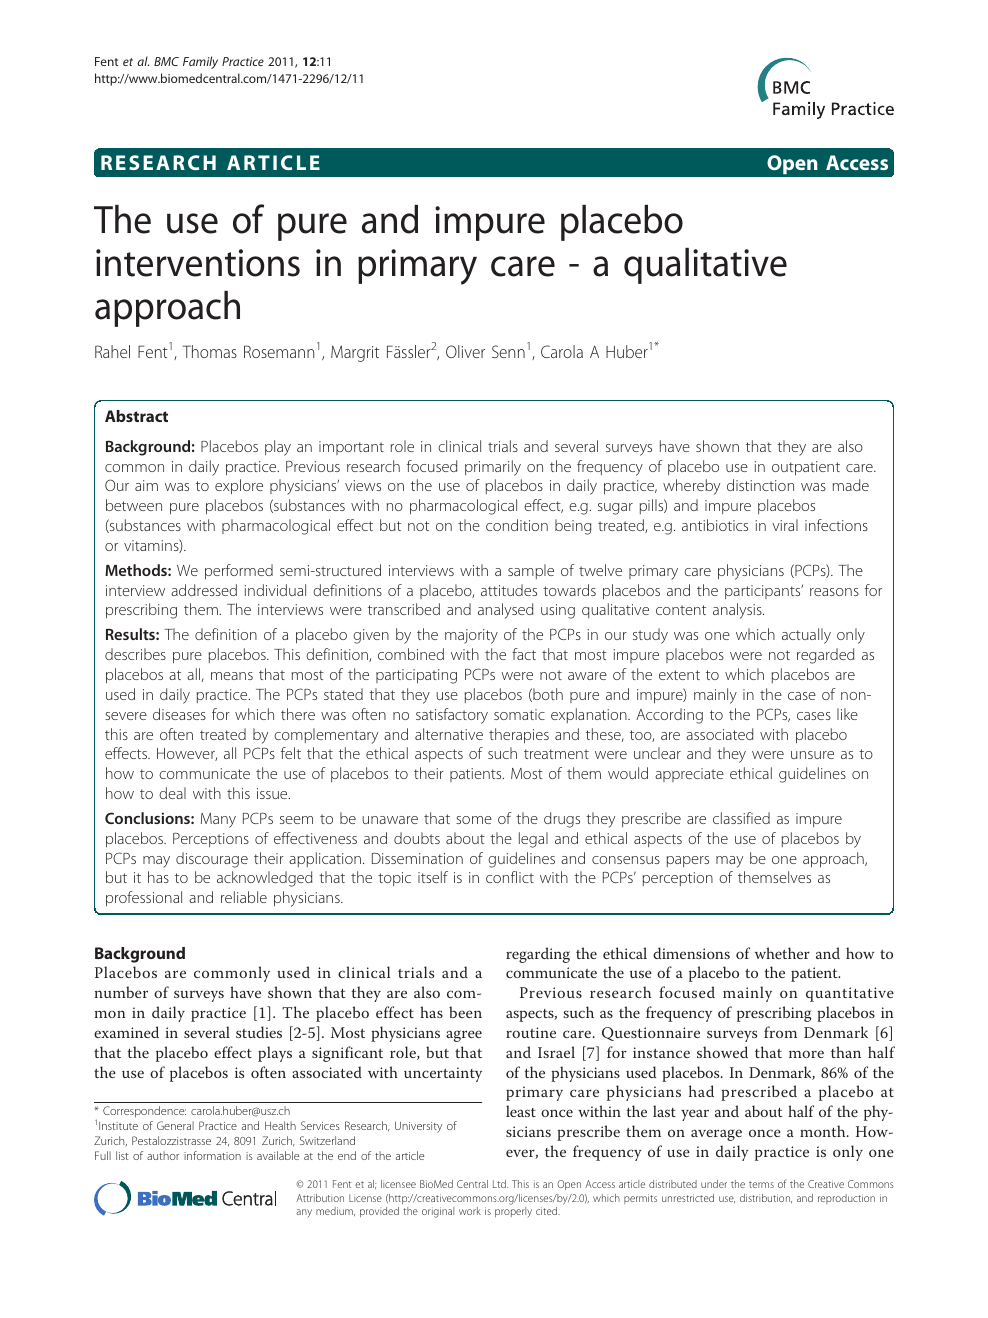 The Use Of Pure And Impure Placebo Interventions In Primary Care A Qualitative Approach Topic Of Research Paper In Clinical Medicine Download Scholarly Article Pdf And Read For Free On